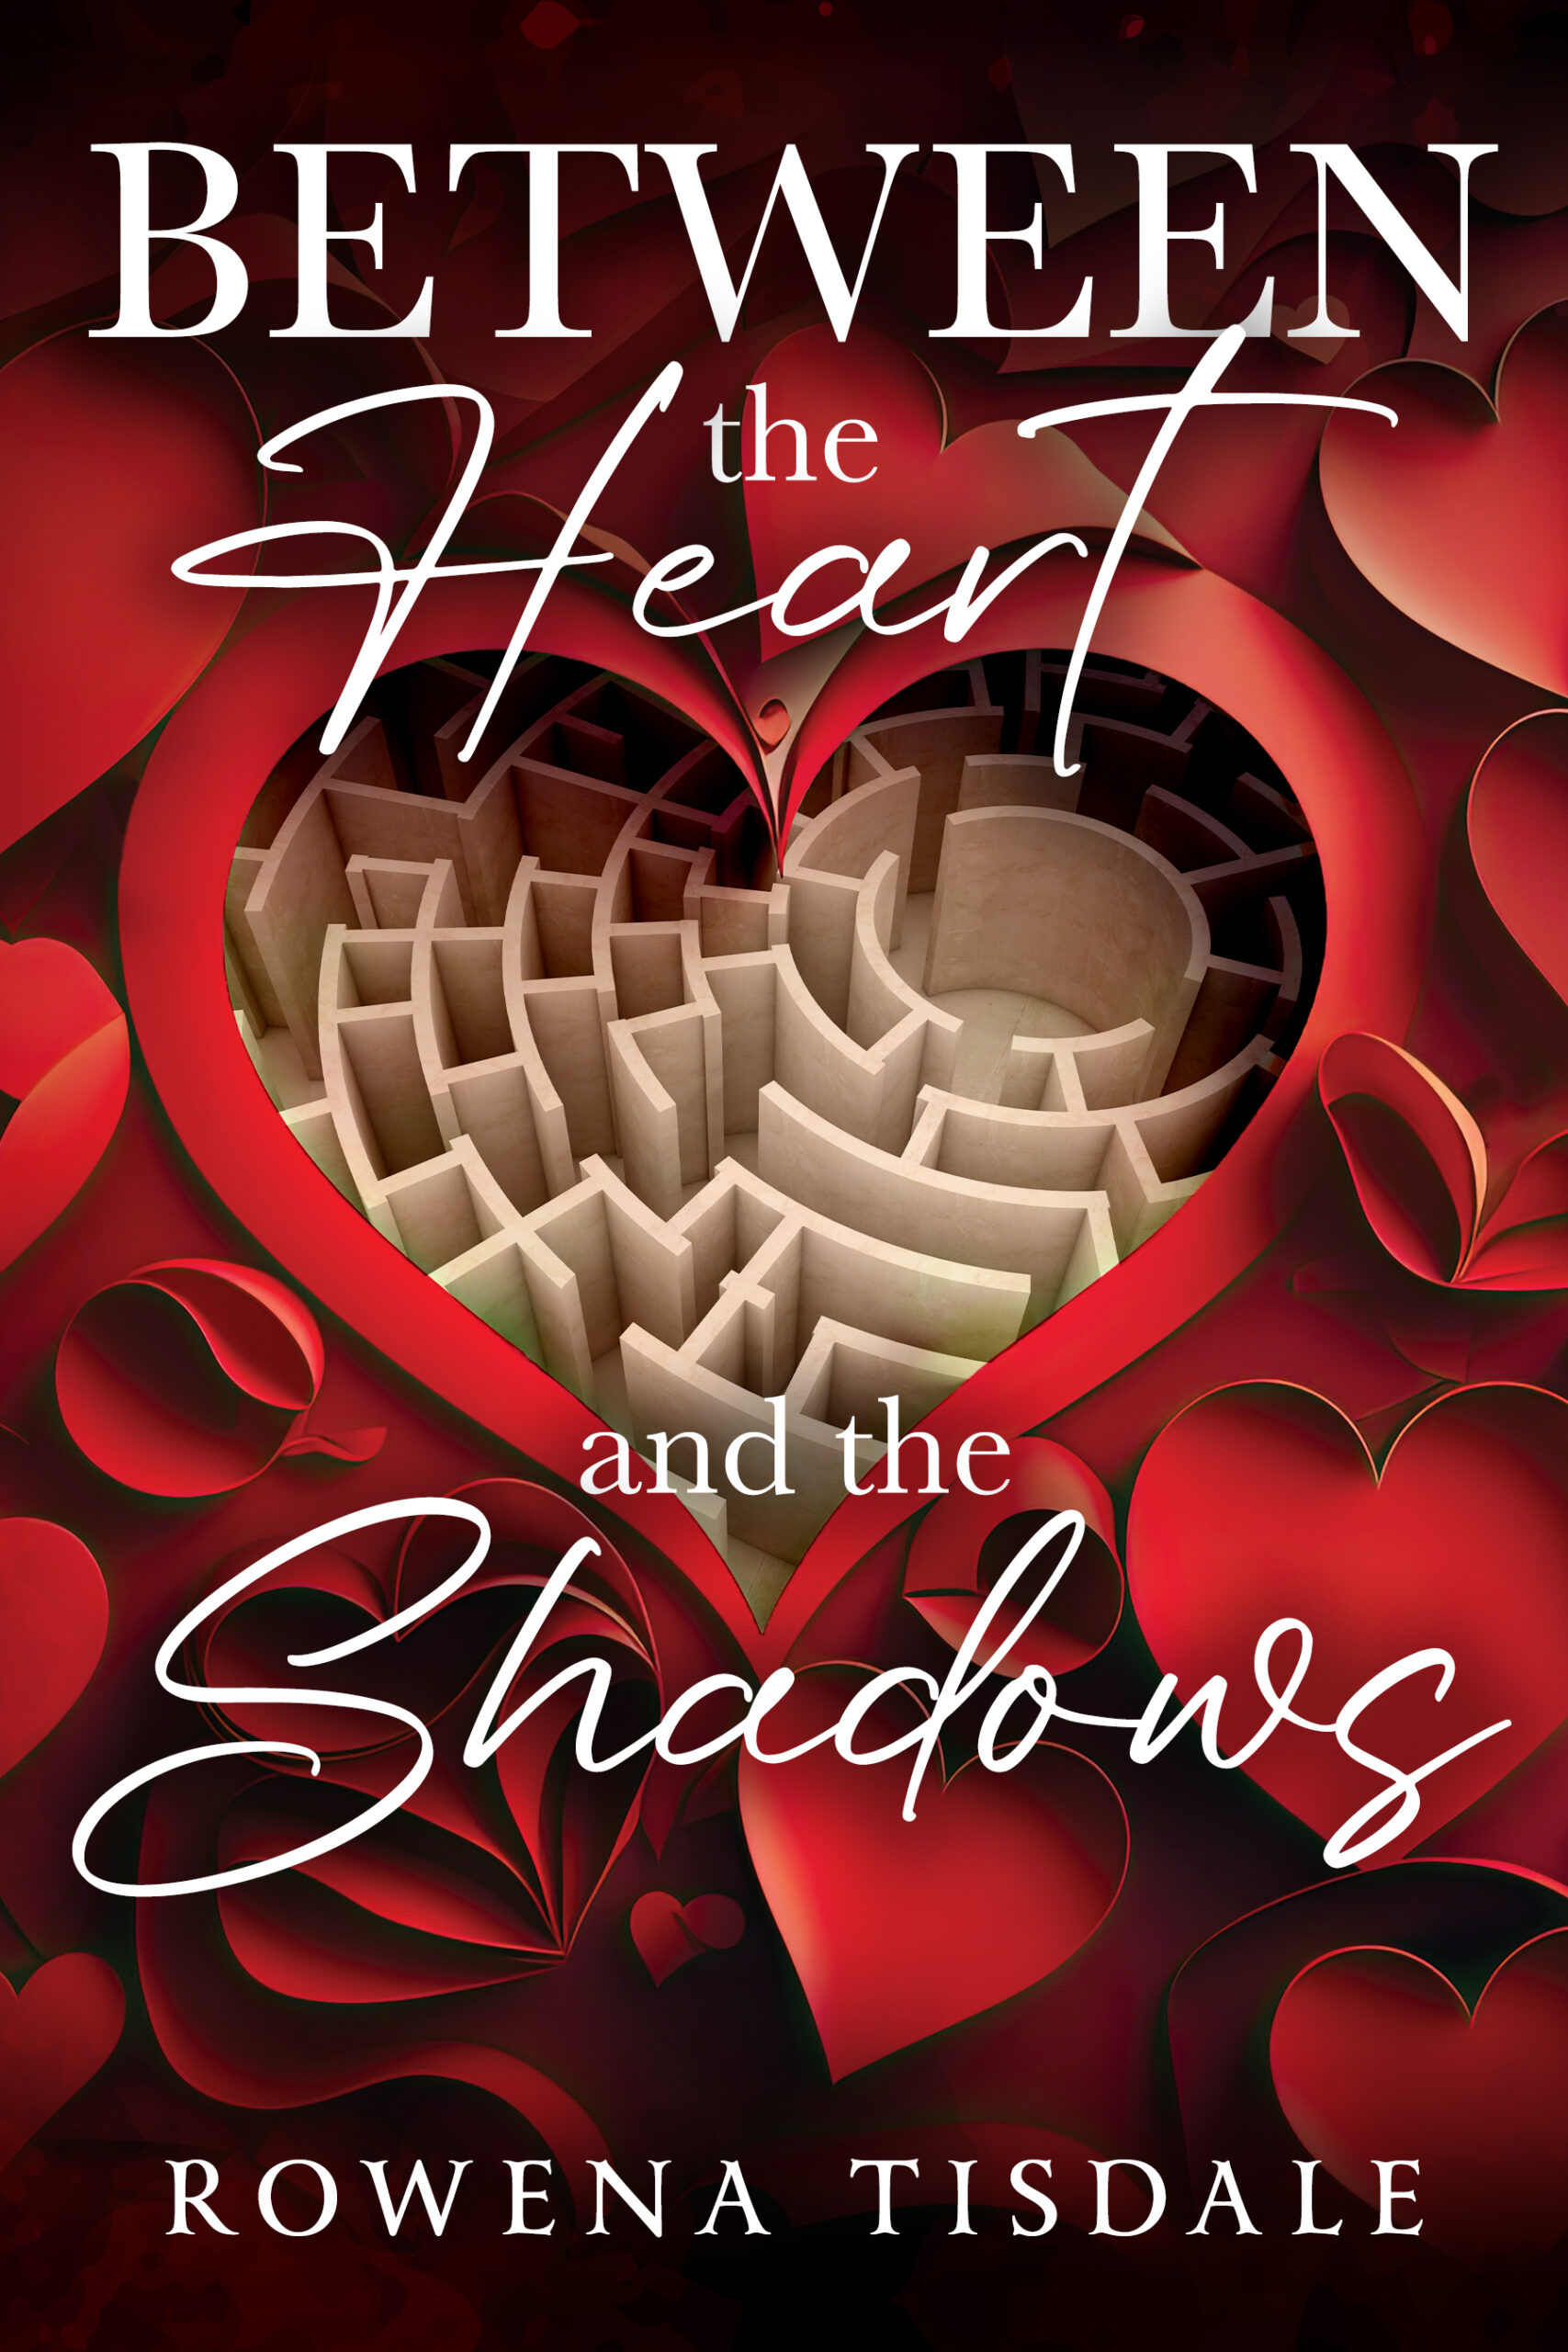 Between the Heart and the Shadows by Rowena Tisdale